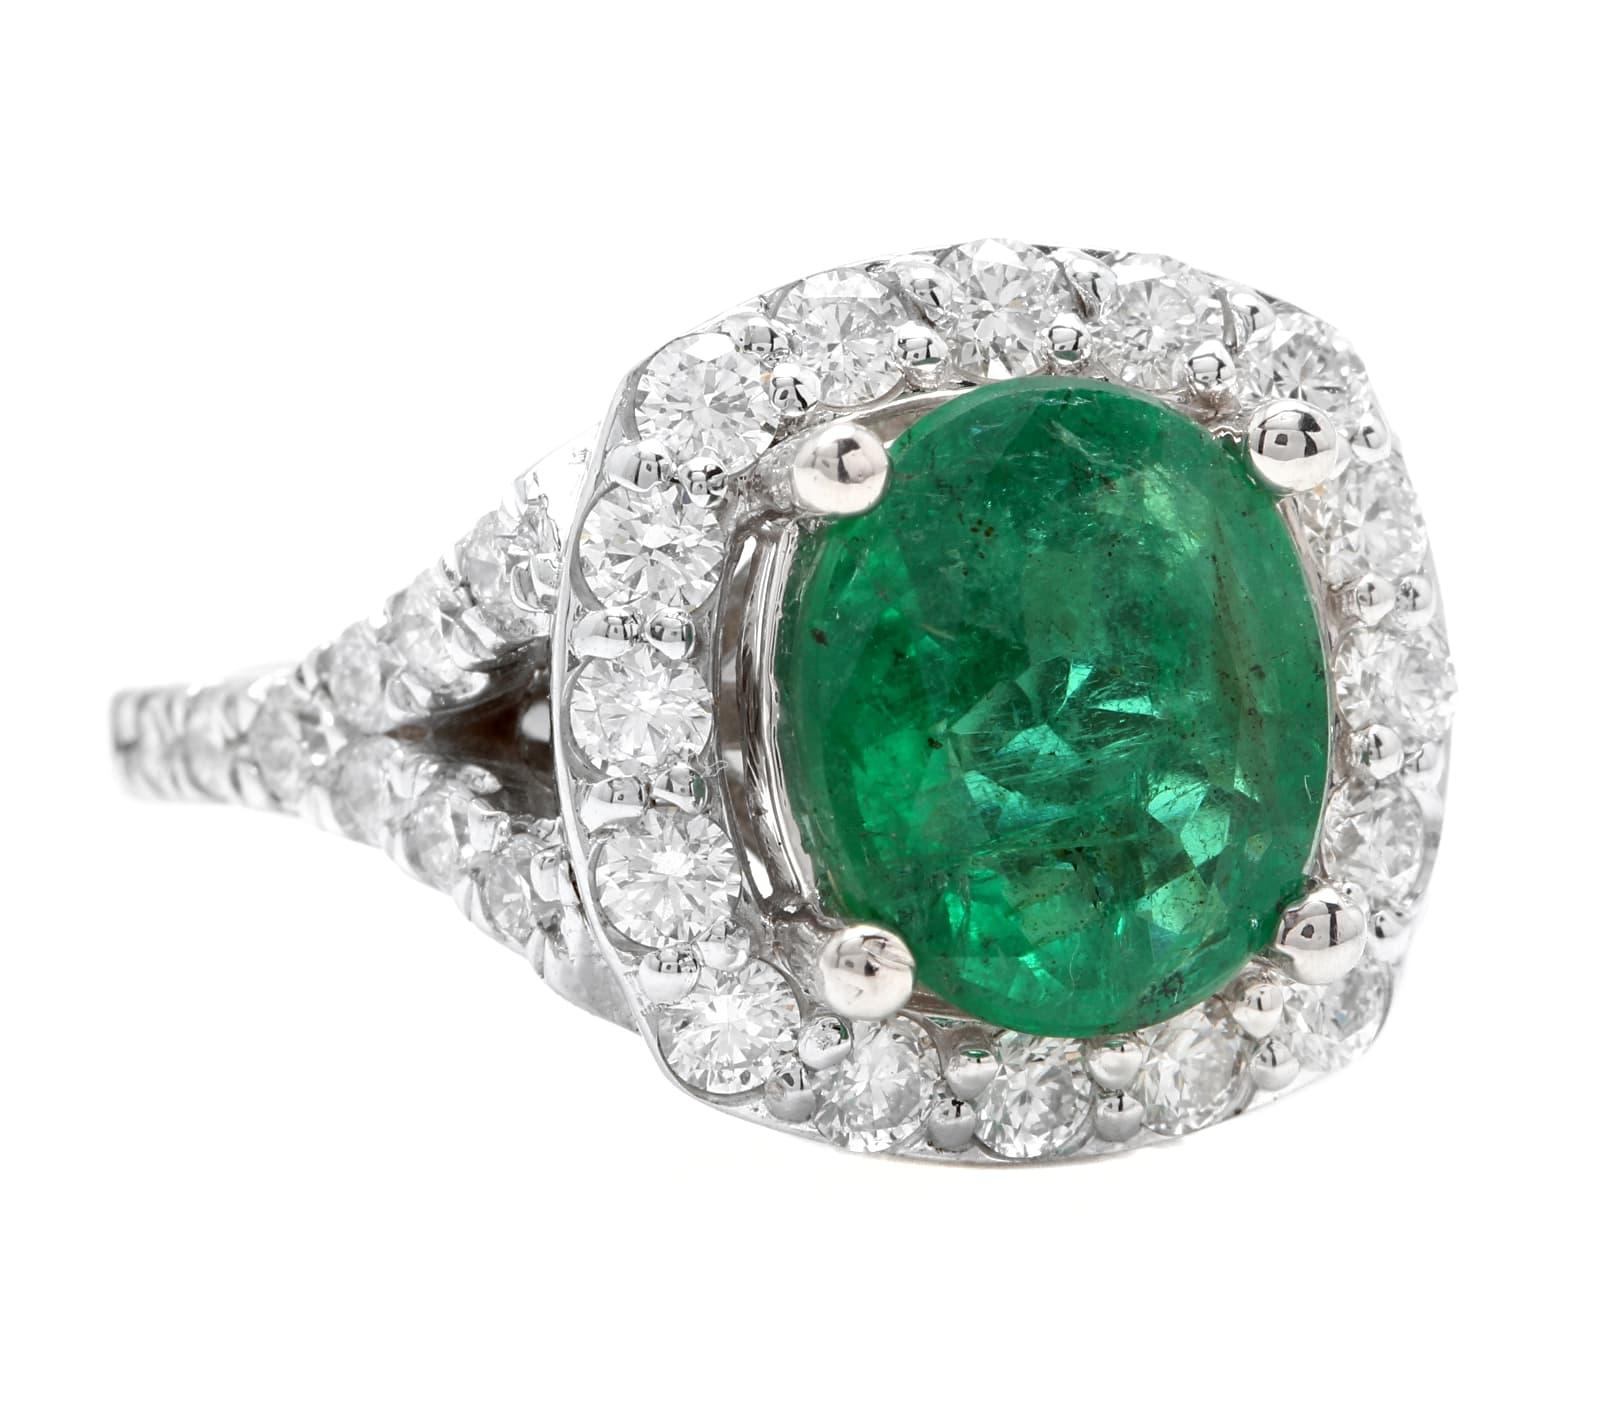 4.65 Carats Natural Emerald and Diamond 14K Solid White Gold Ring

Total Natural Green Emerald Weight is: Approx. 3.50 Carats (transparent)

Emerald Measures: Approx. 10.20 x 8.60mm

Emerald Treatment: Oiling

Natural Round Diamonds Weight: Approx. 